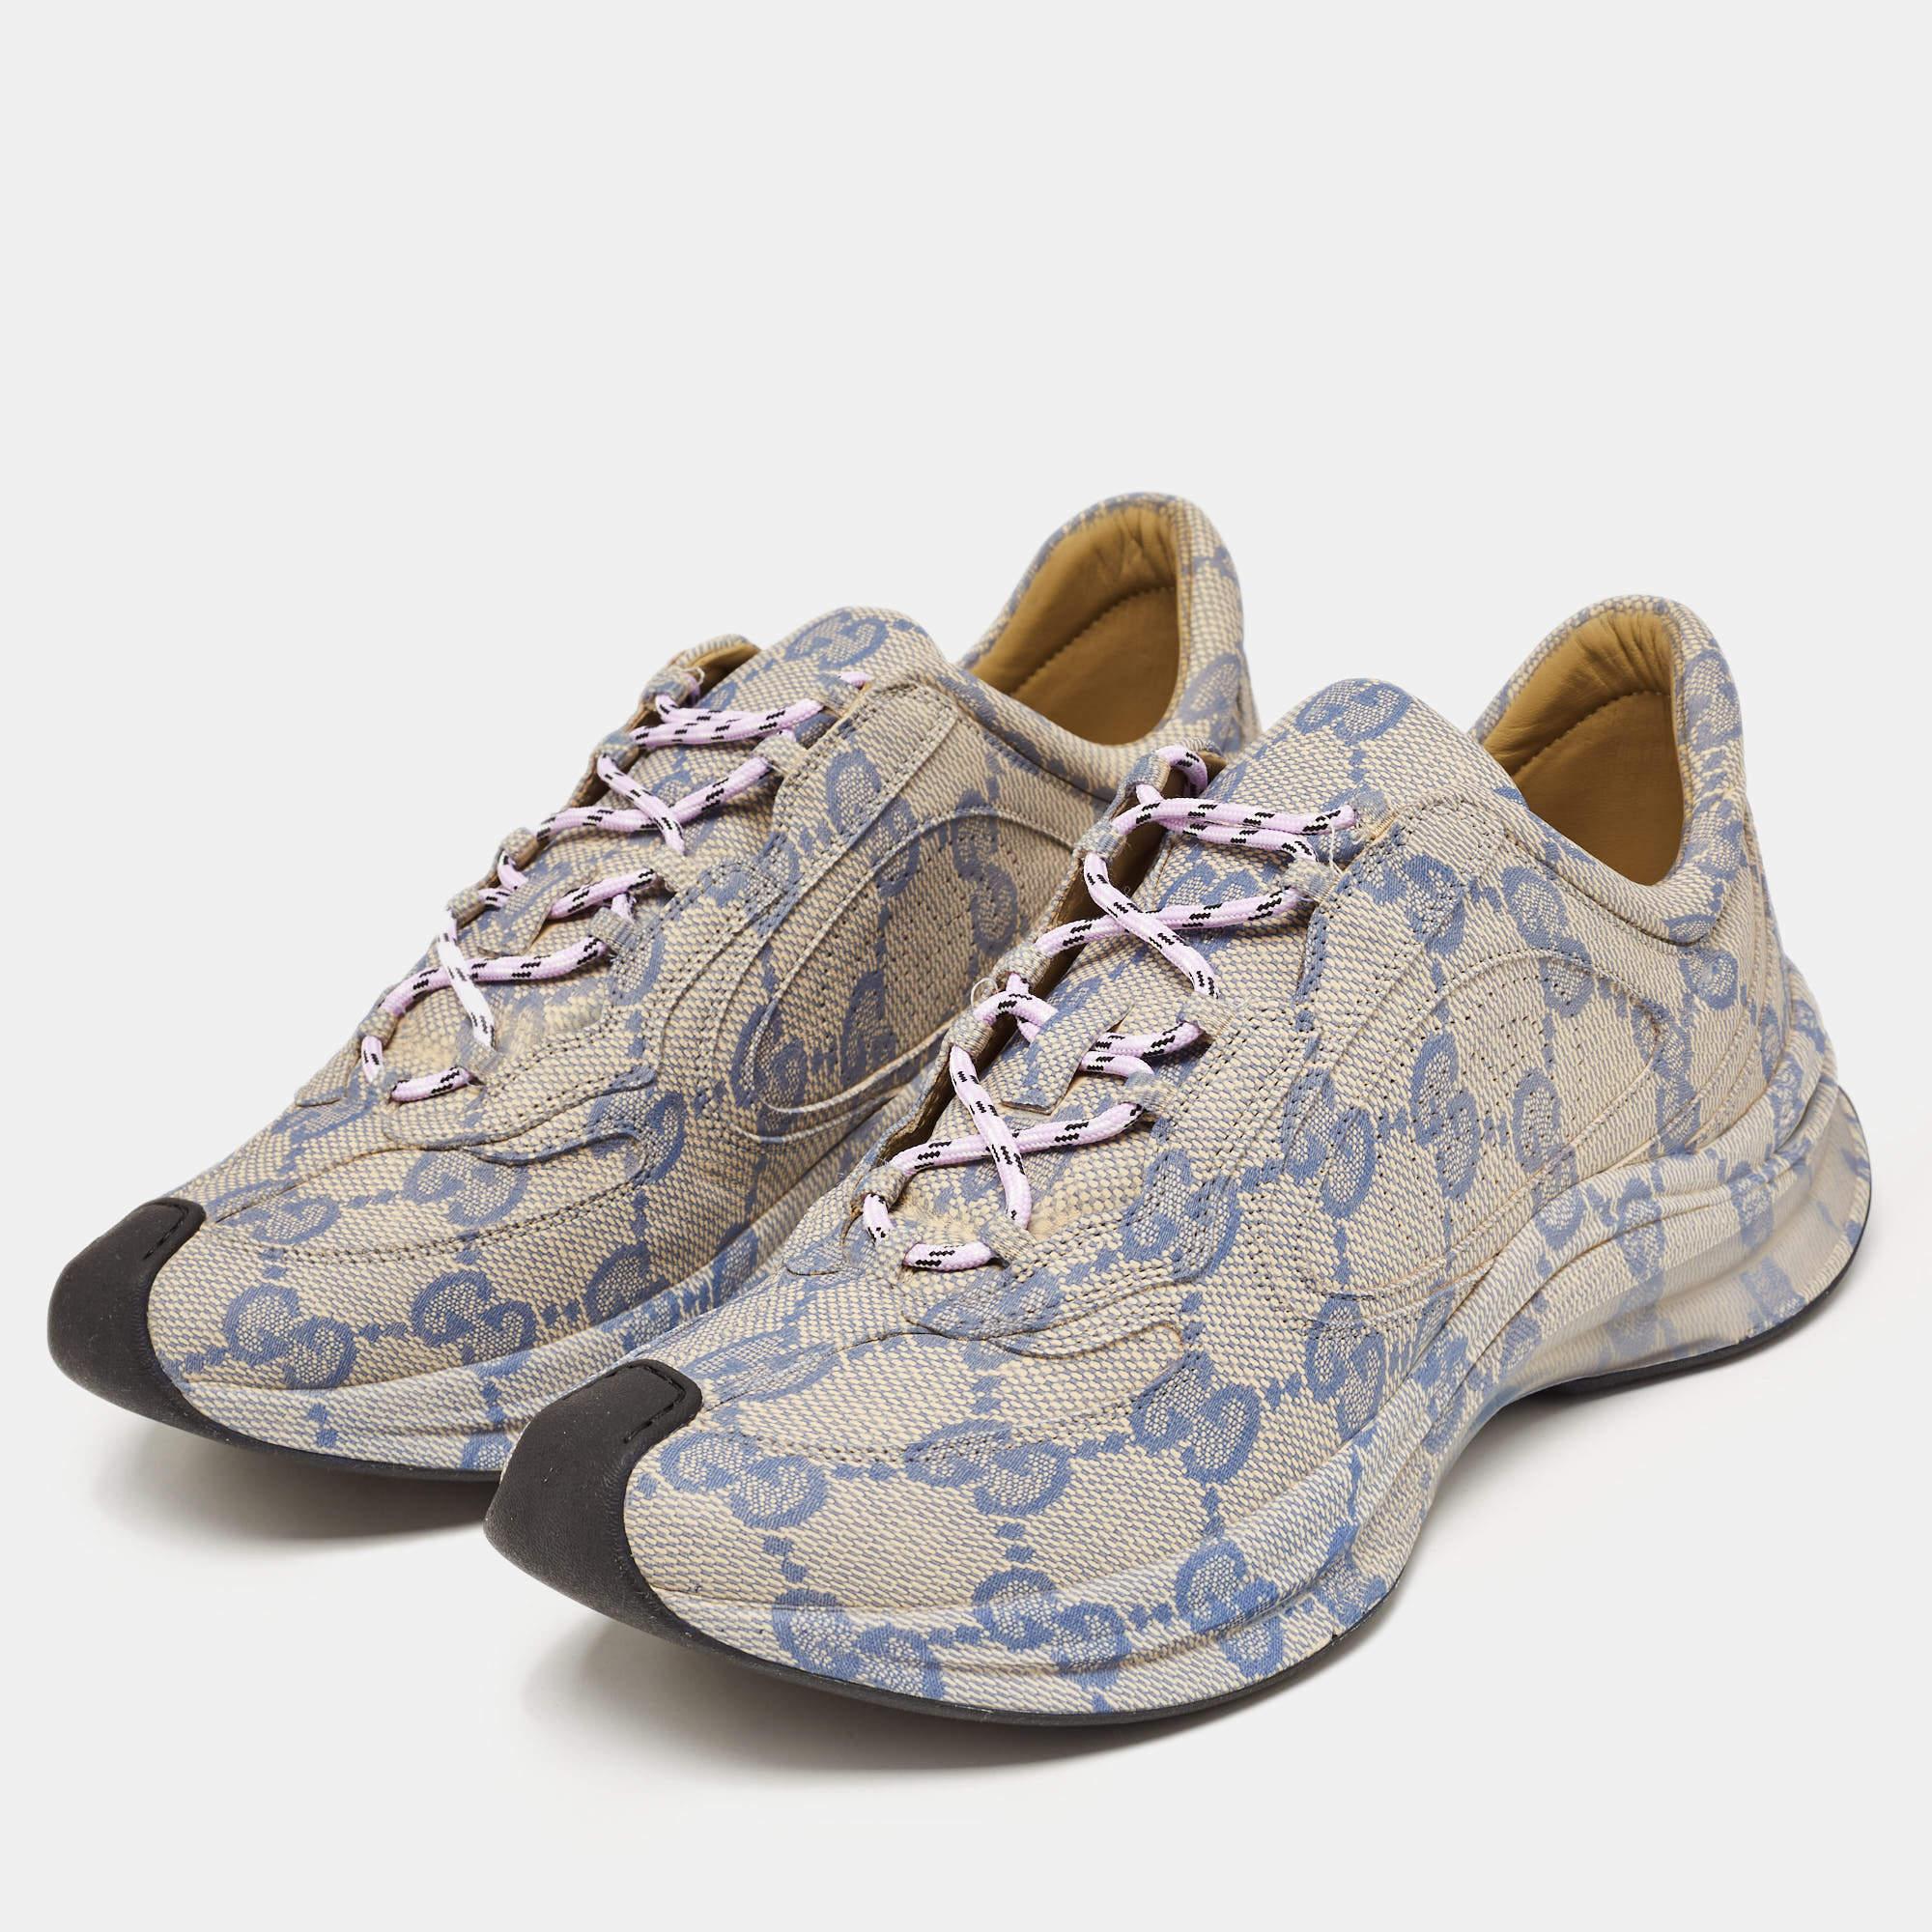 Gucci Beige/Blue GG Printed Leather Run Sneakers Size 44 4